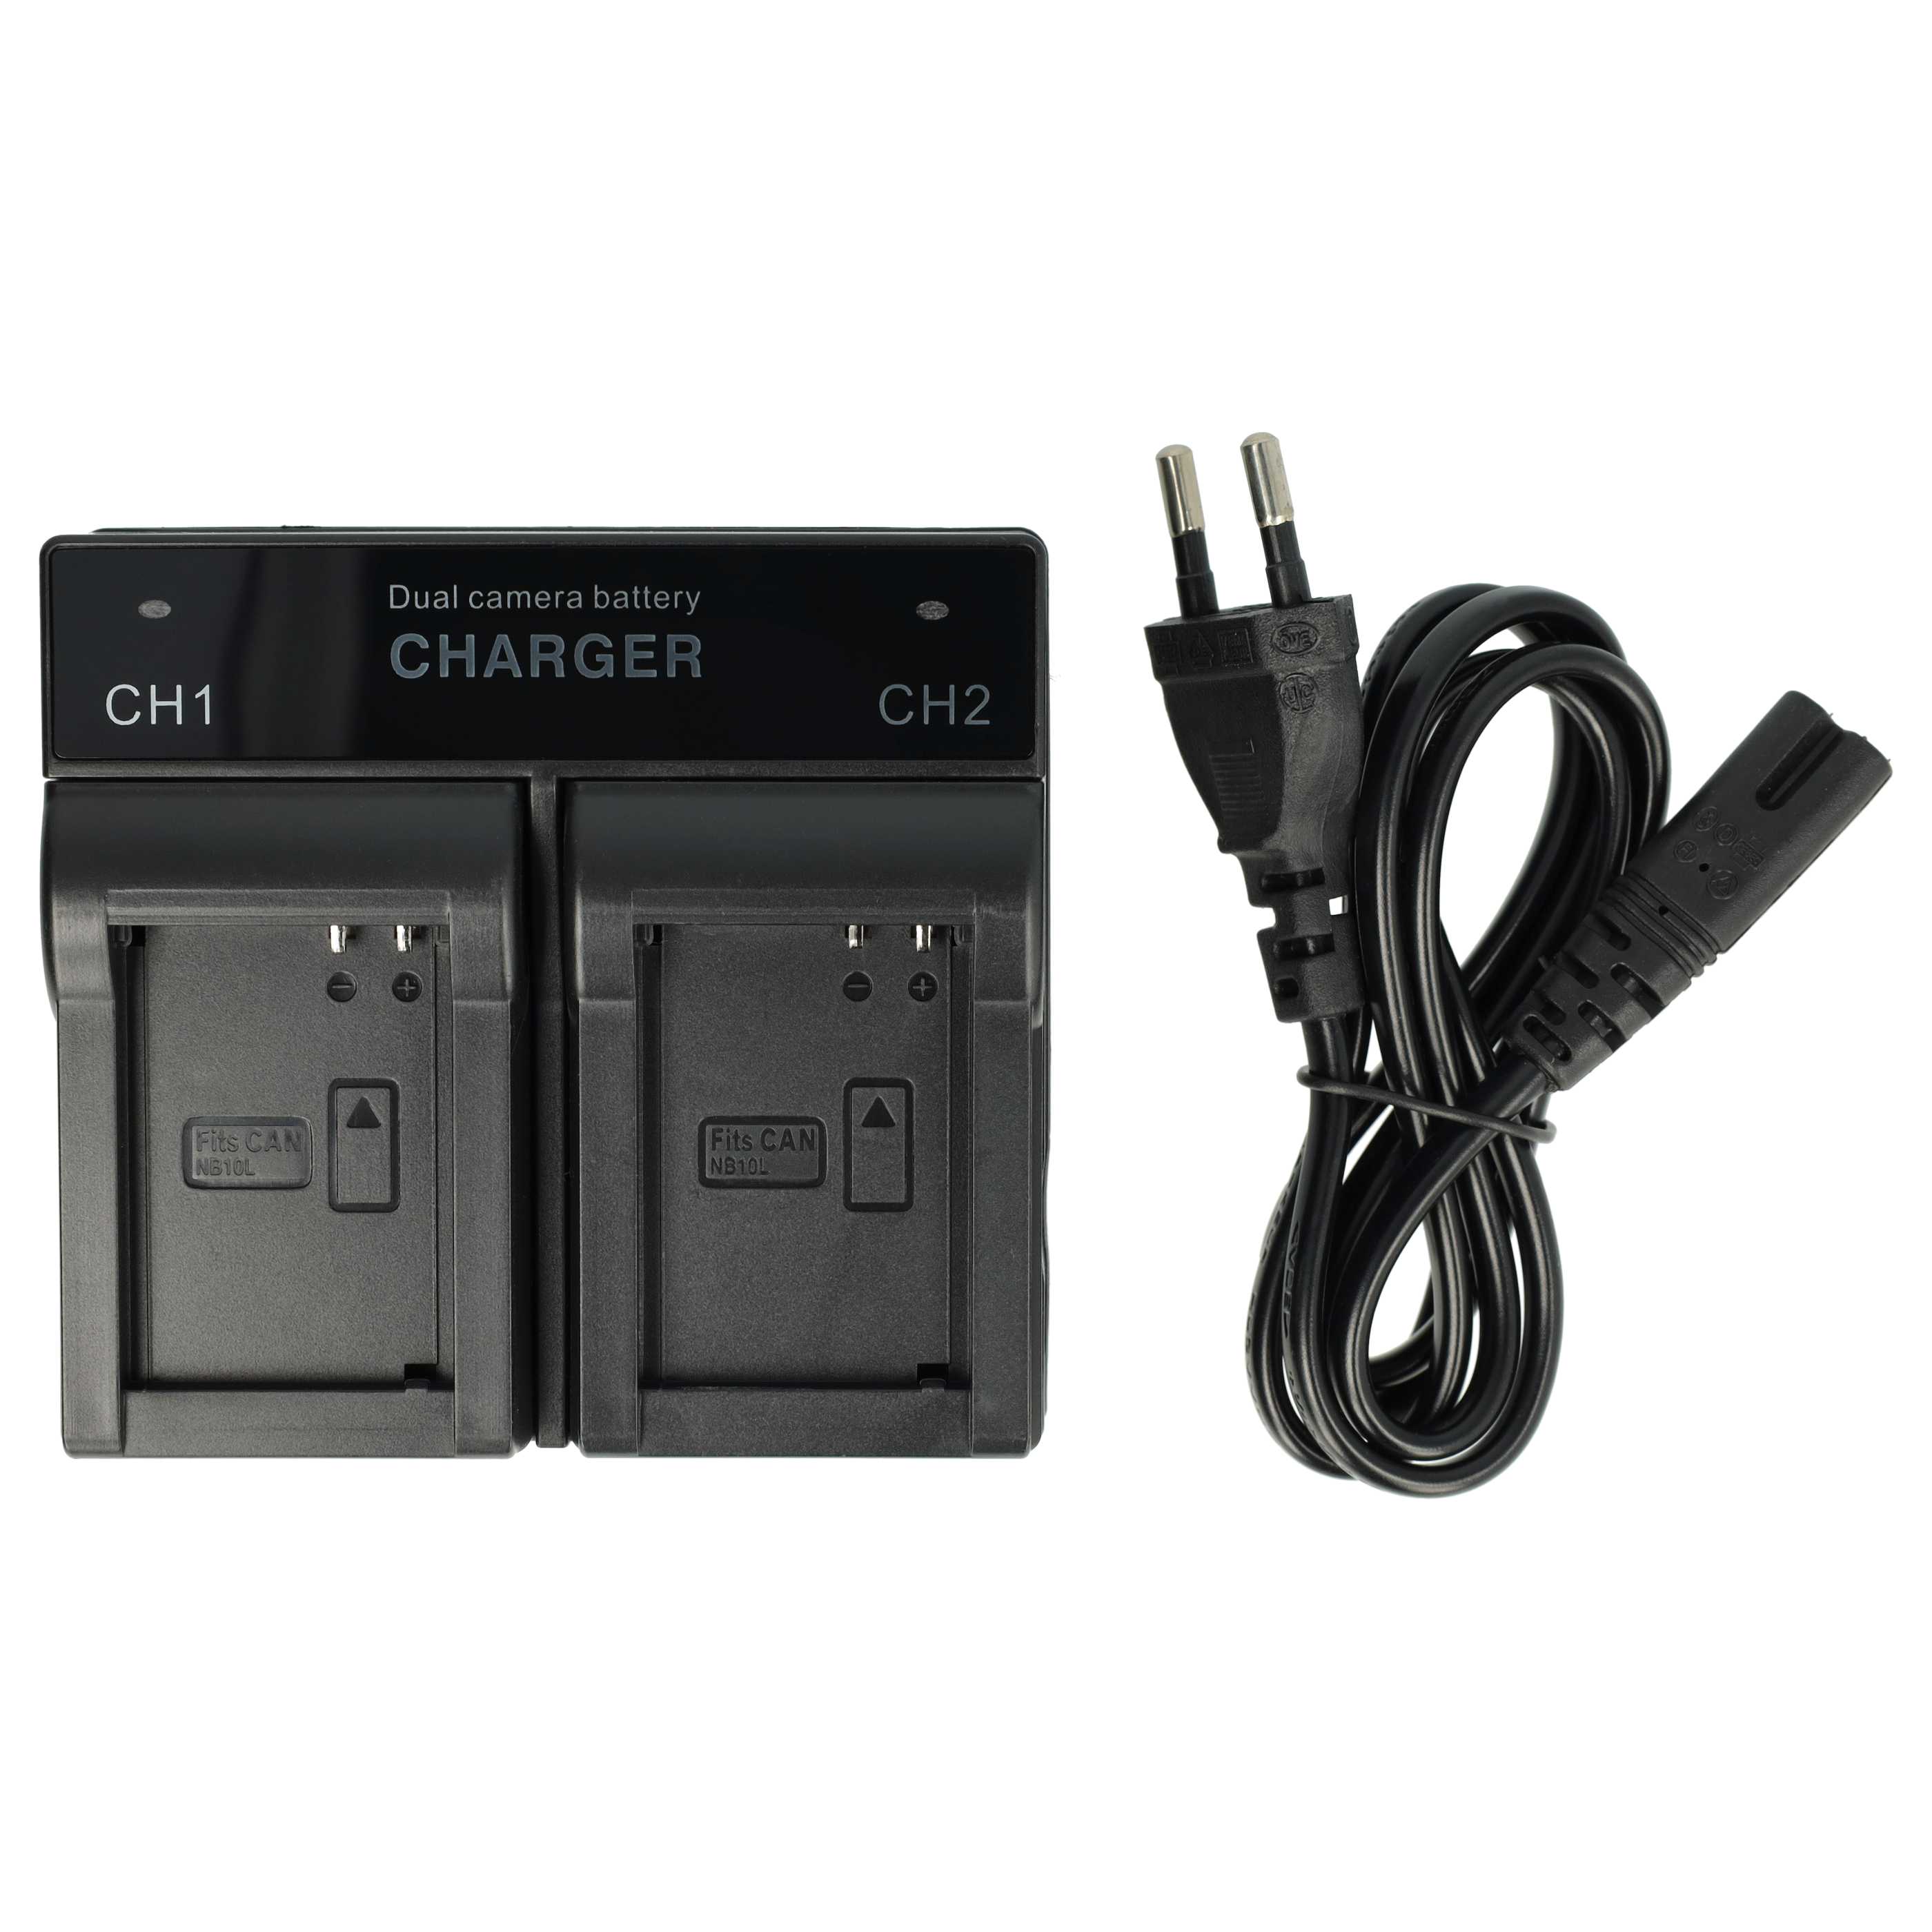 Battery Charger suitable for PowerShot G10 Camera etc. - 0.5 / 0.9 A, 4.2/8.4 V